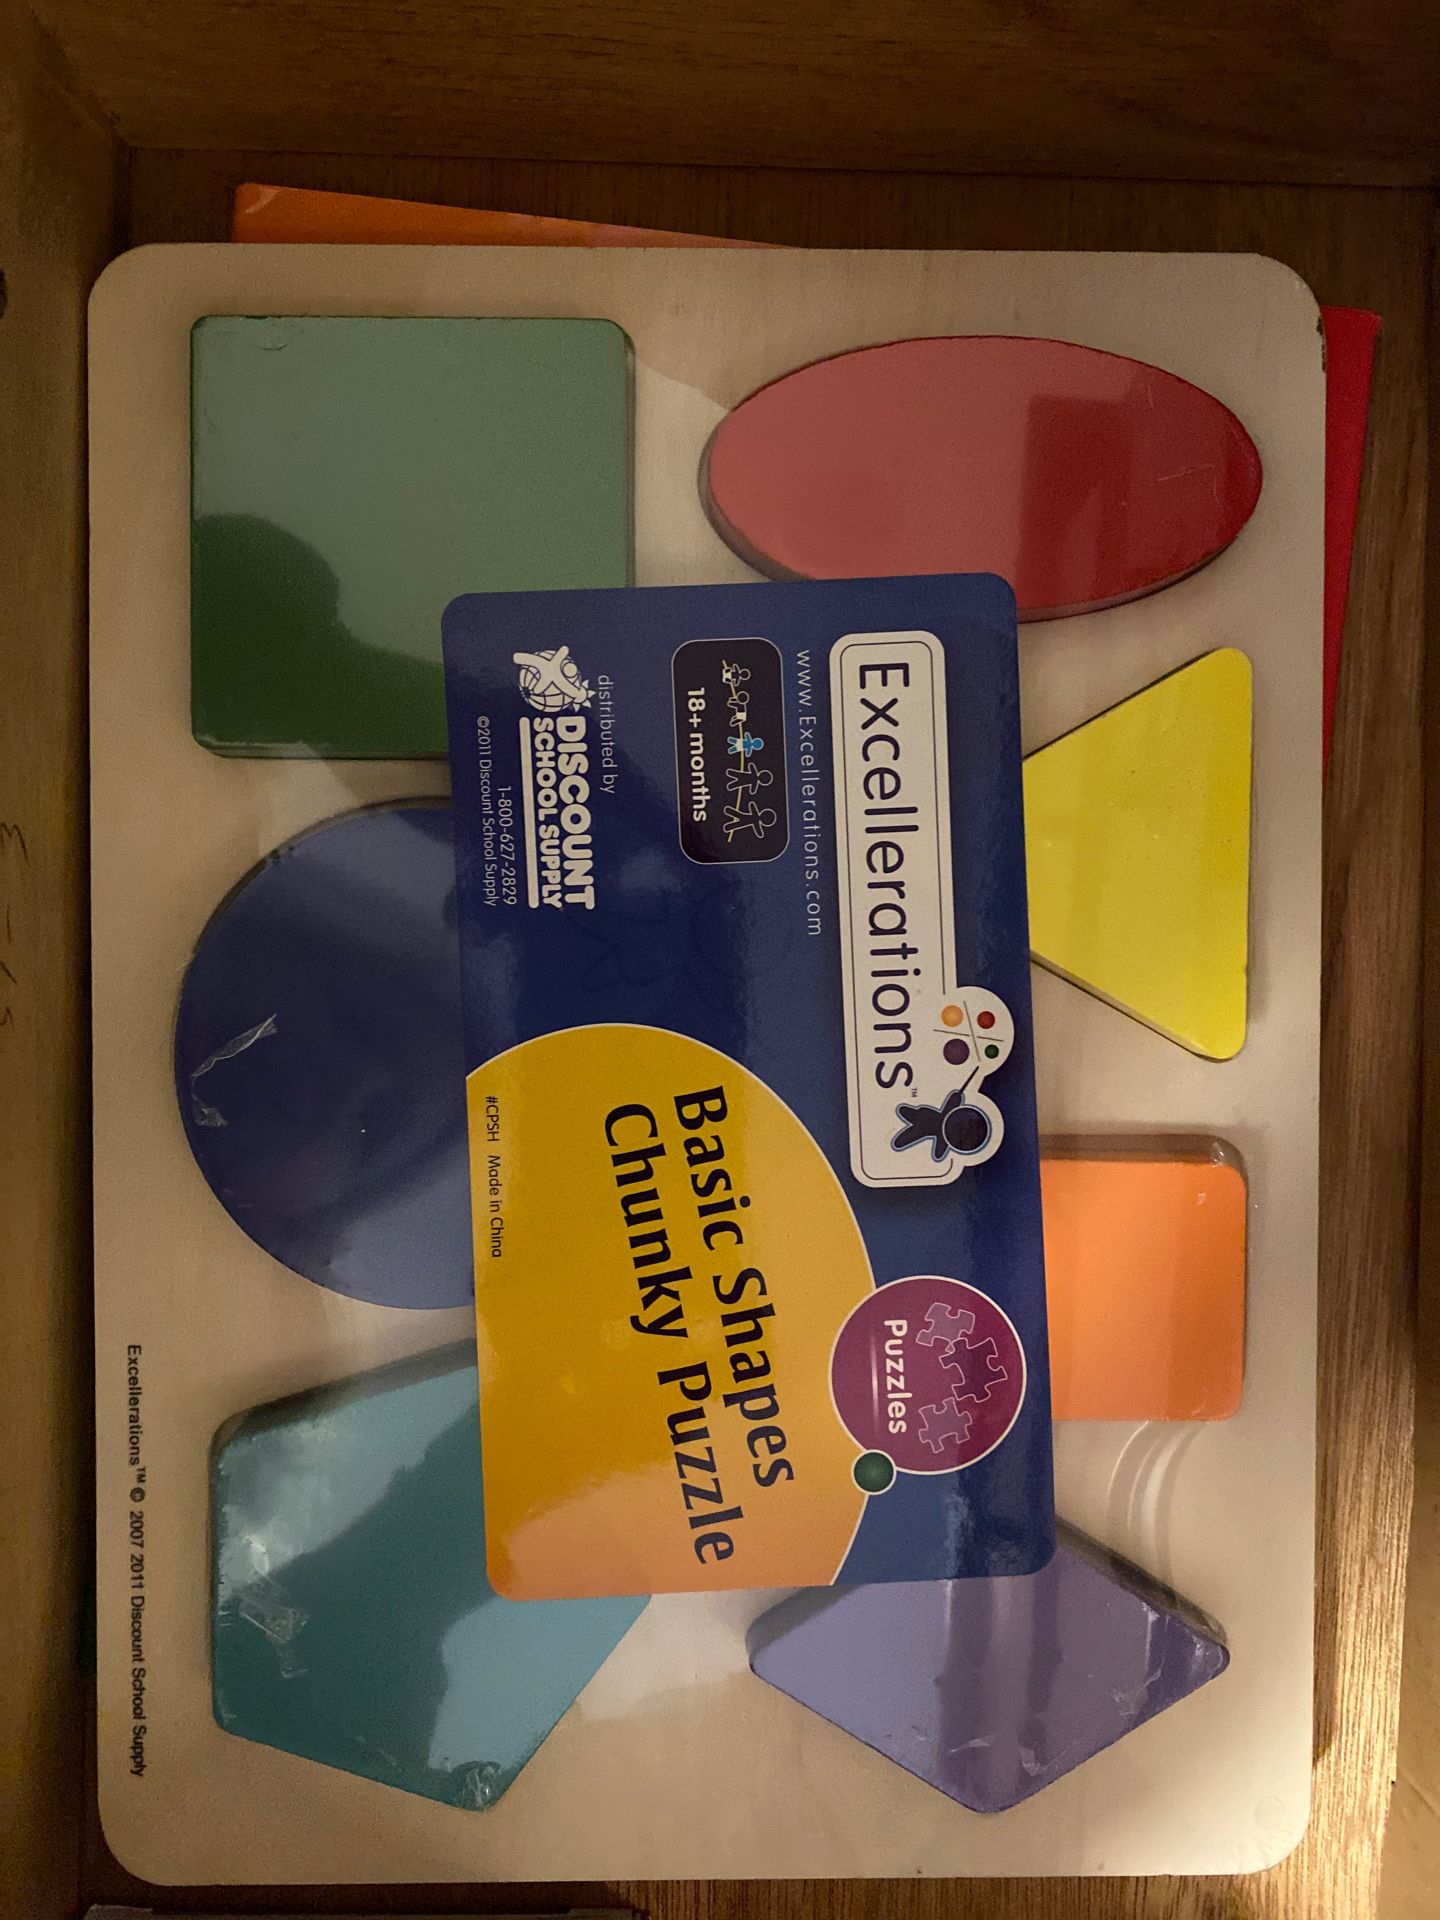 Brand new basics shapes chunky puzzle 18 months and up